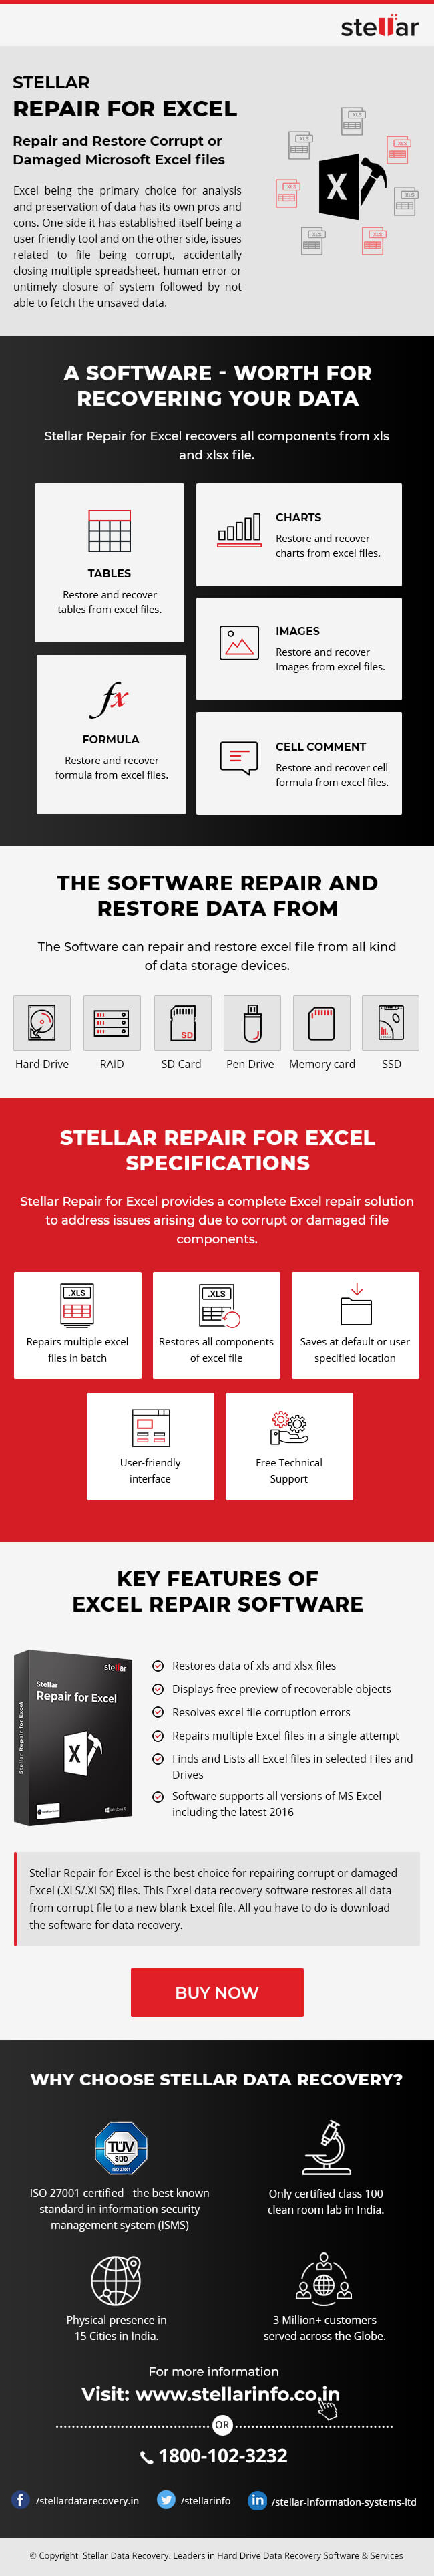 instal the new for windows Stellar Repair for Excel 6.0.0.6